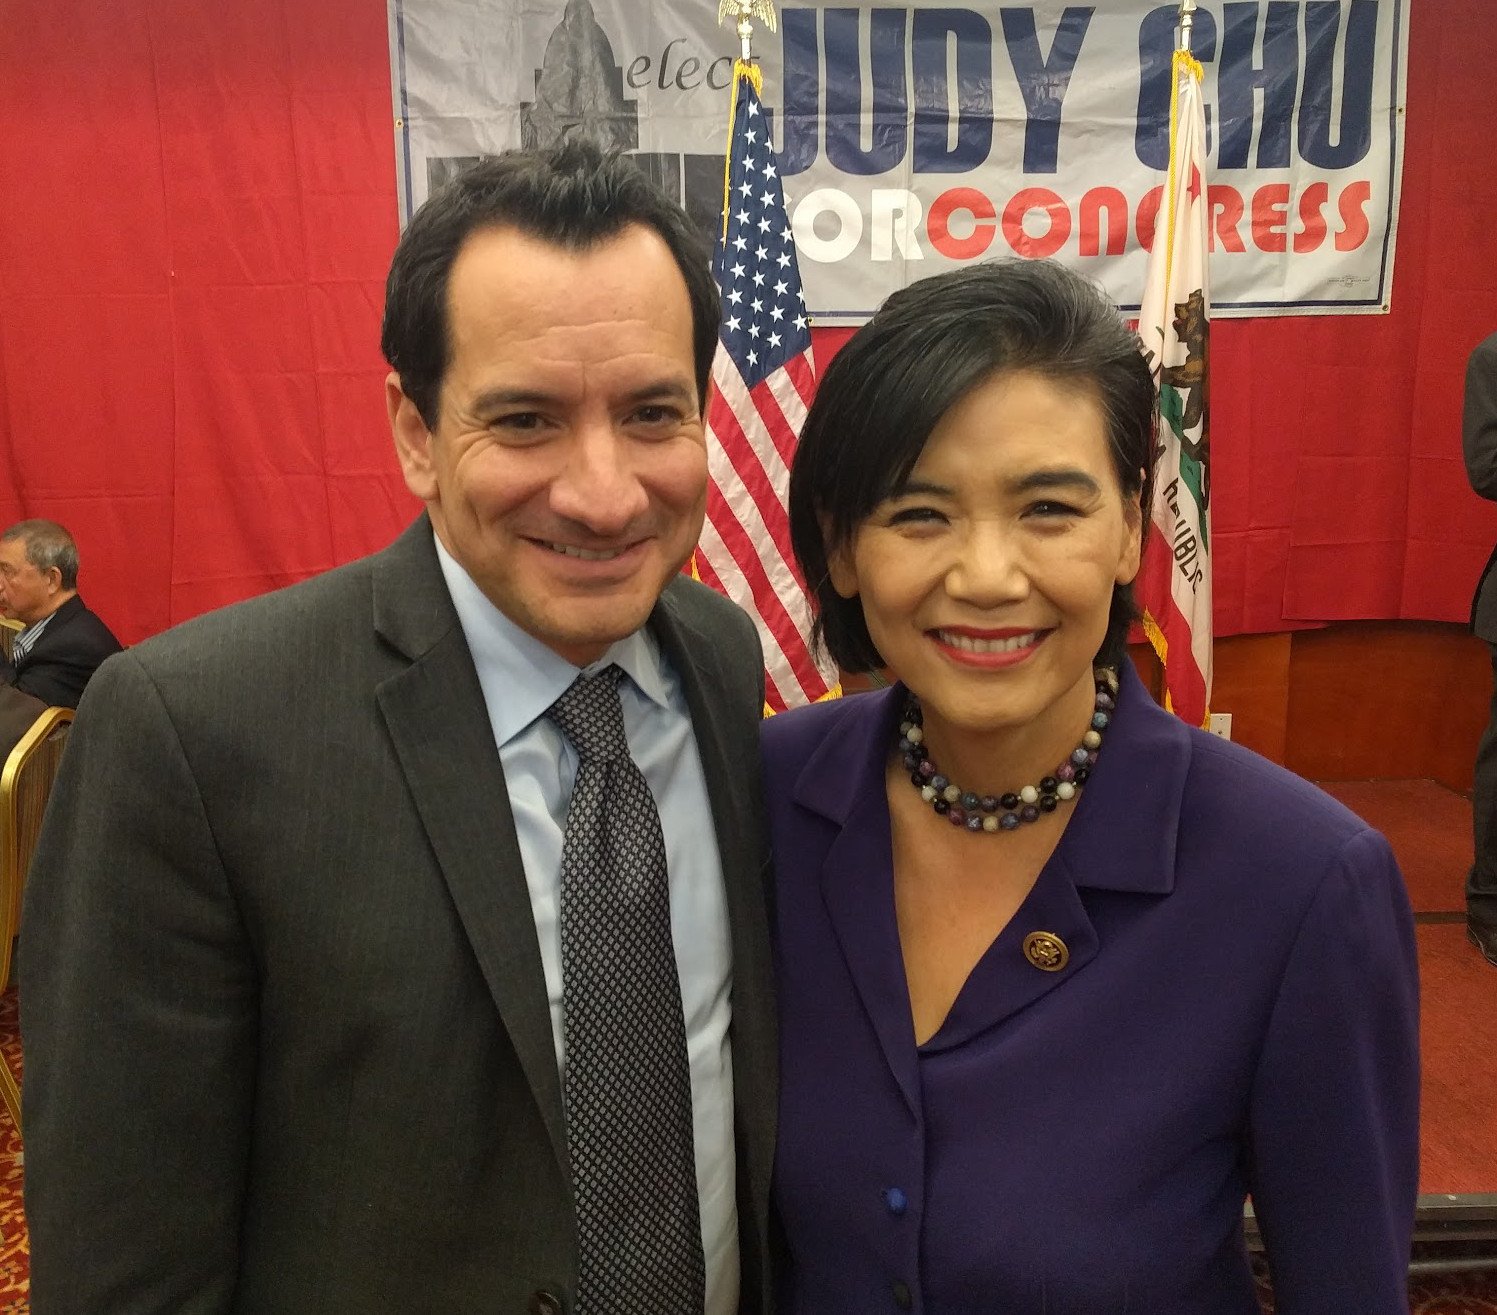 Rep. Judy Chu and CA Assembly Speaker Anthony Rendon